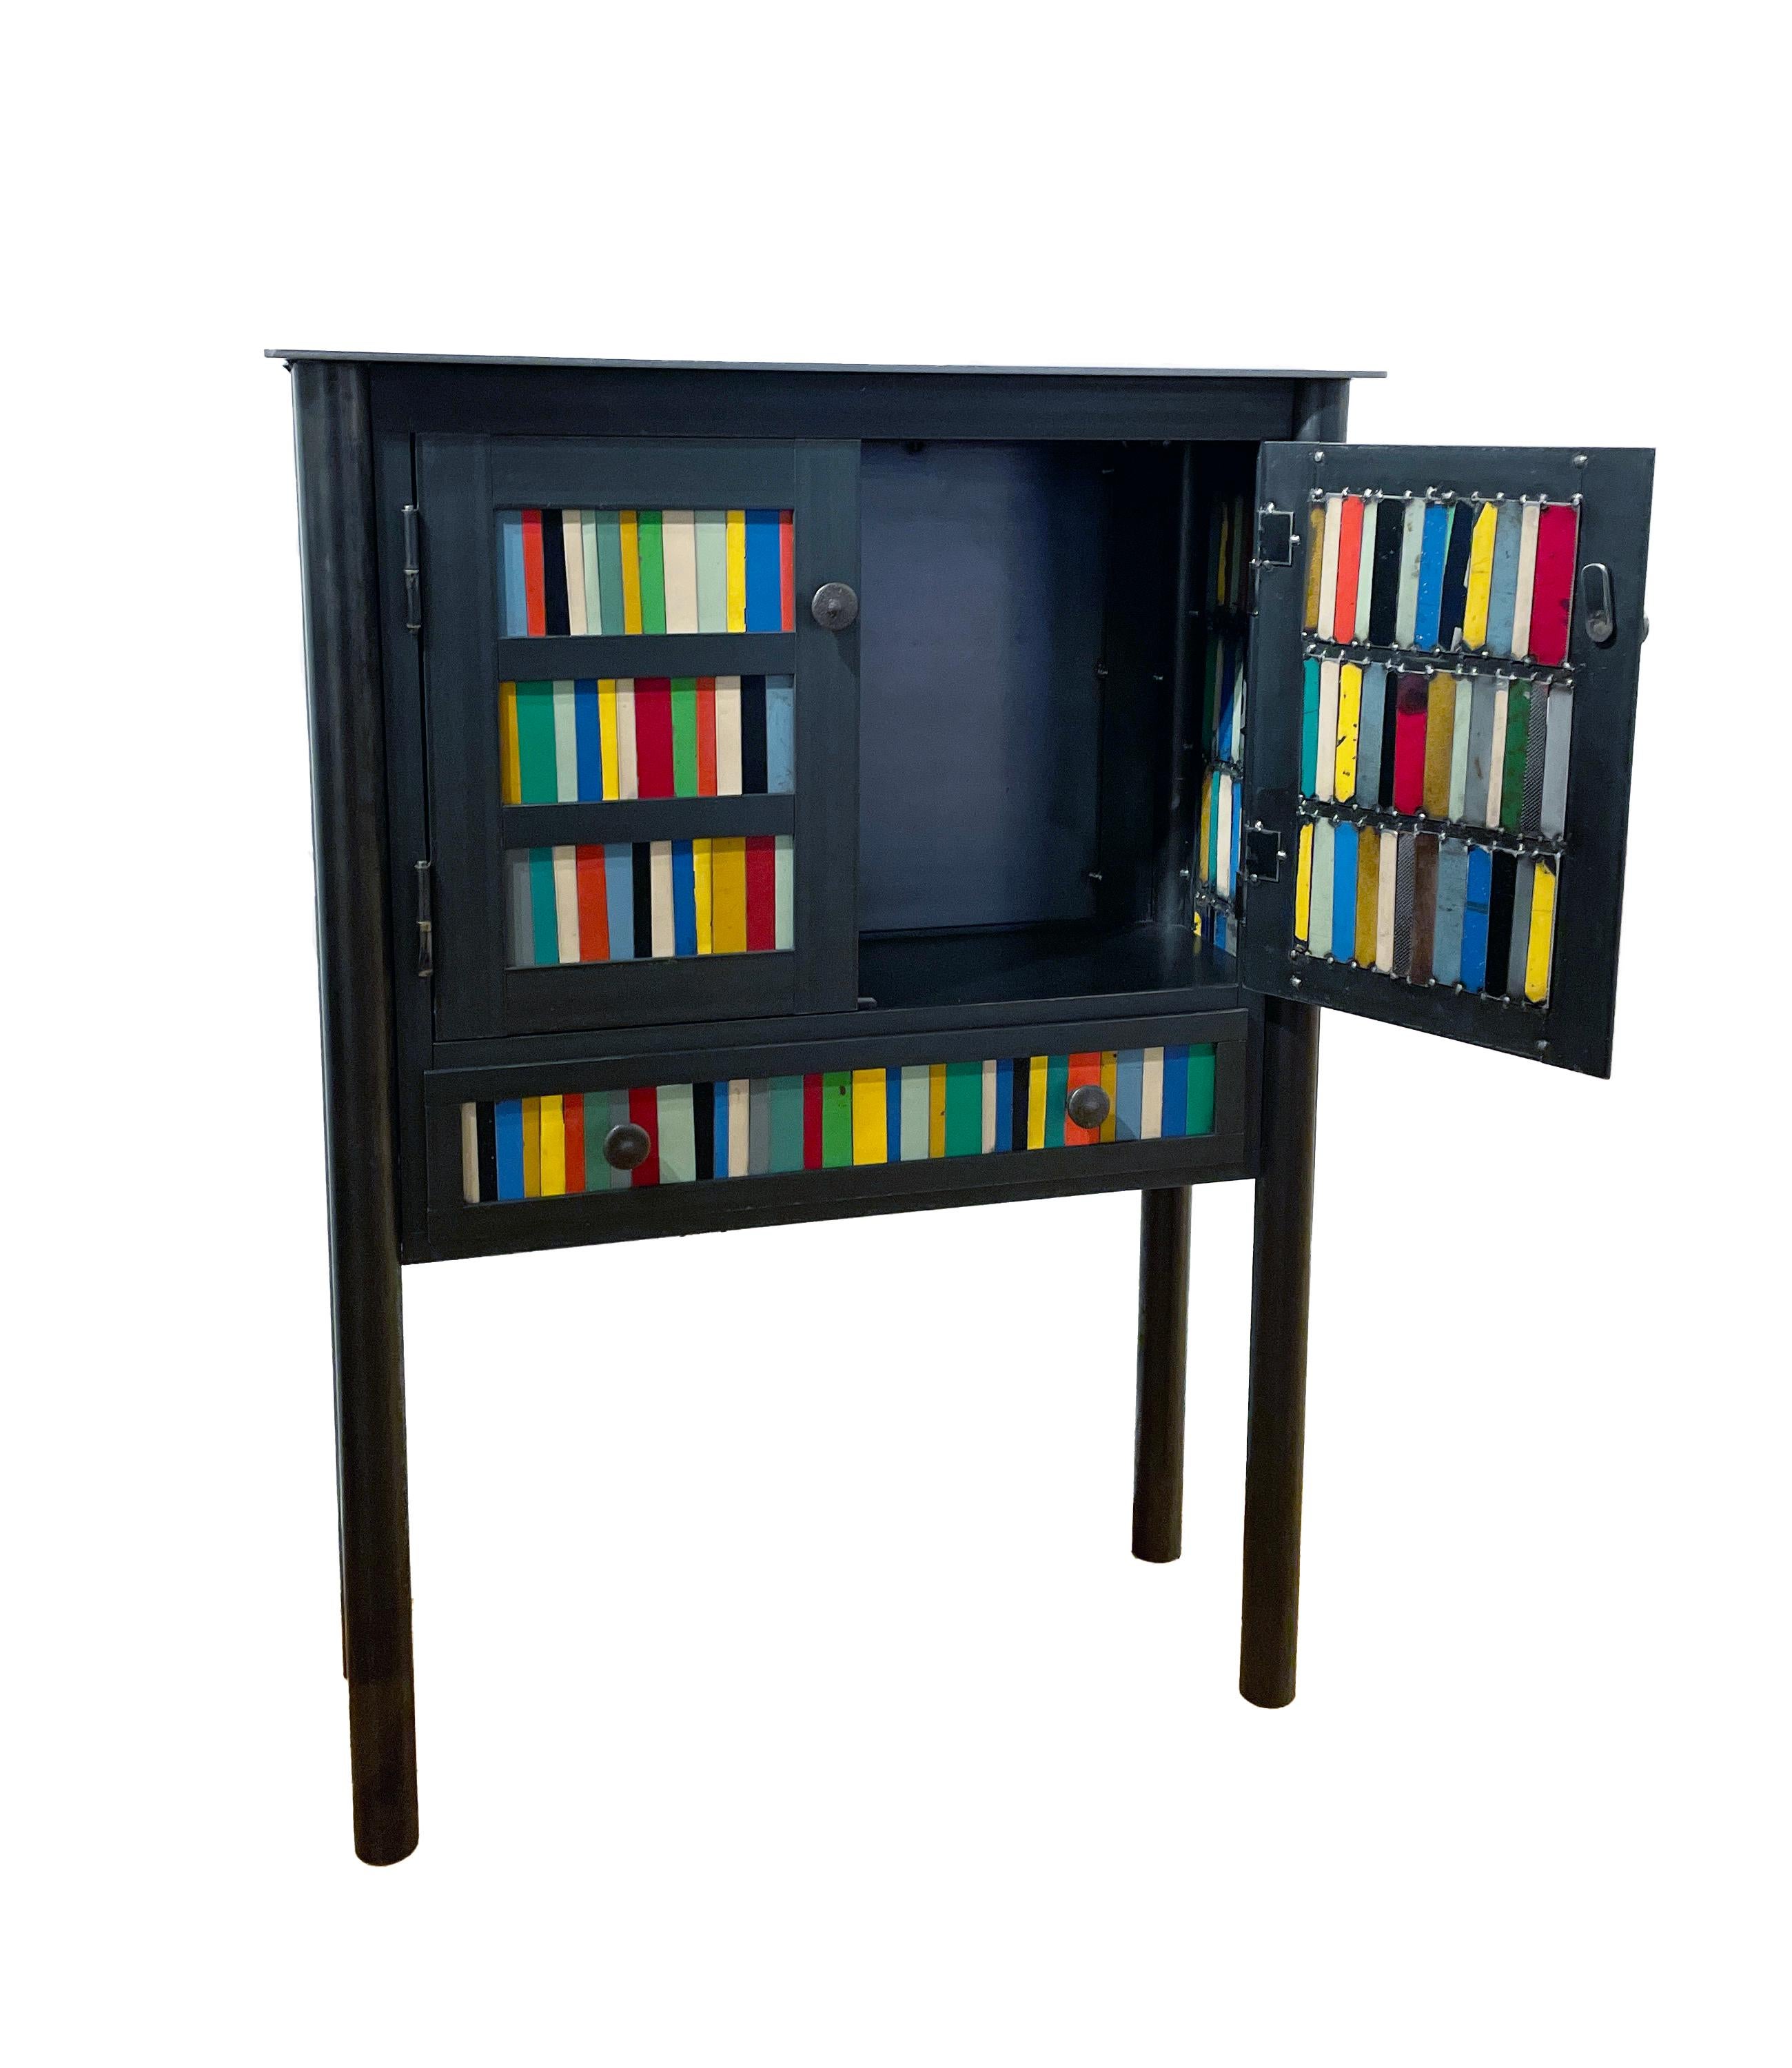 Welded Jim Rose Steel Furniture, Multi-Colored Narrow Two Door Cabinet with Drawer